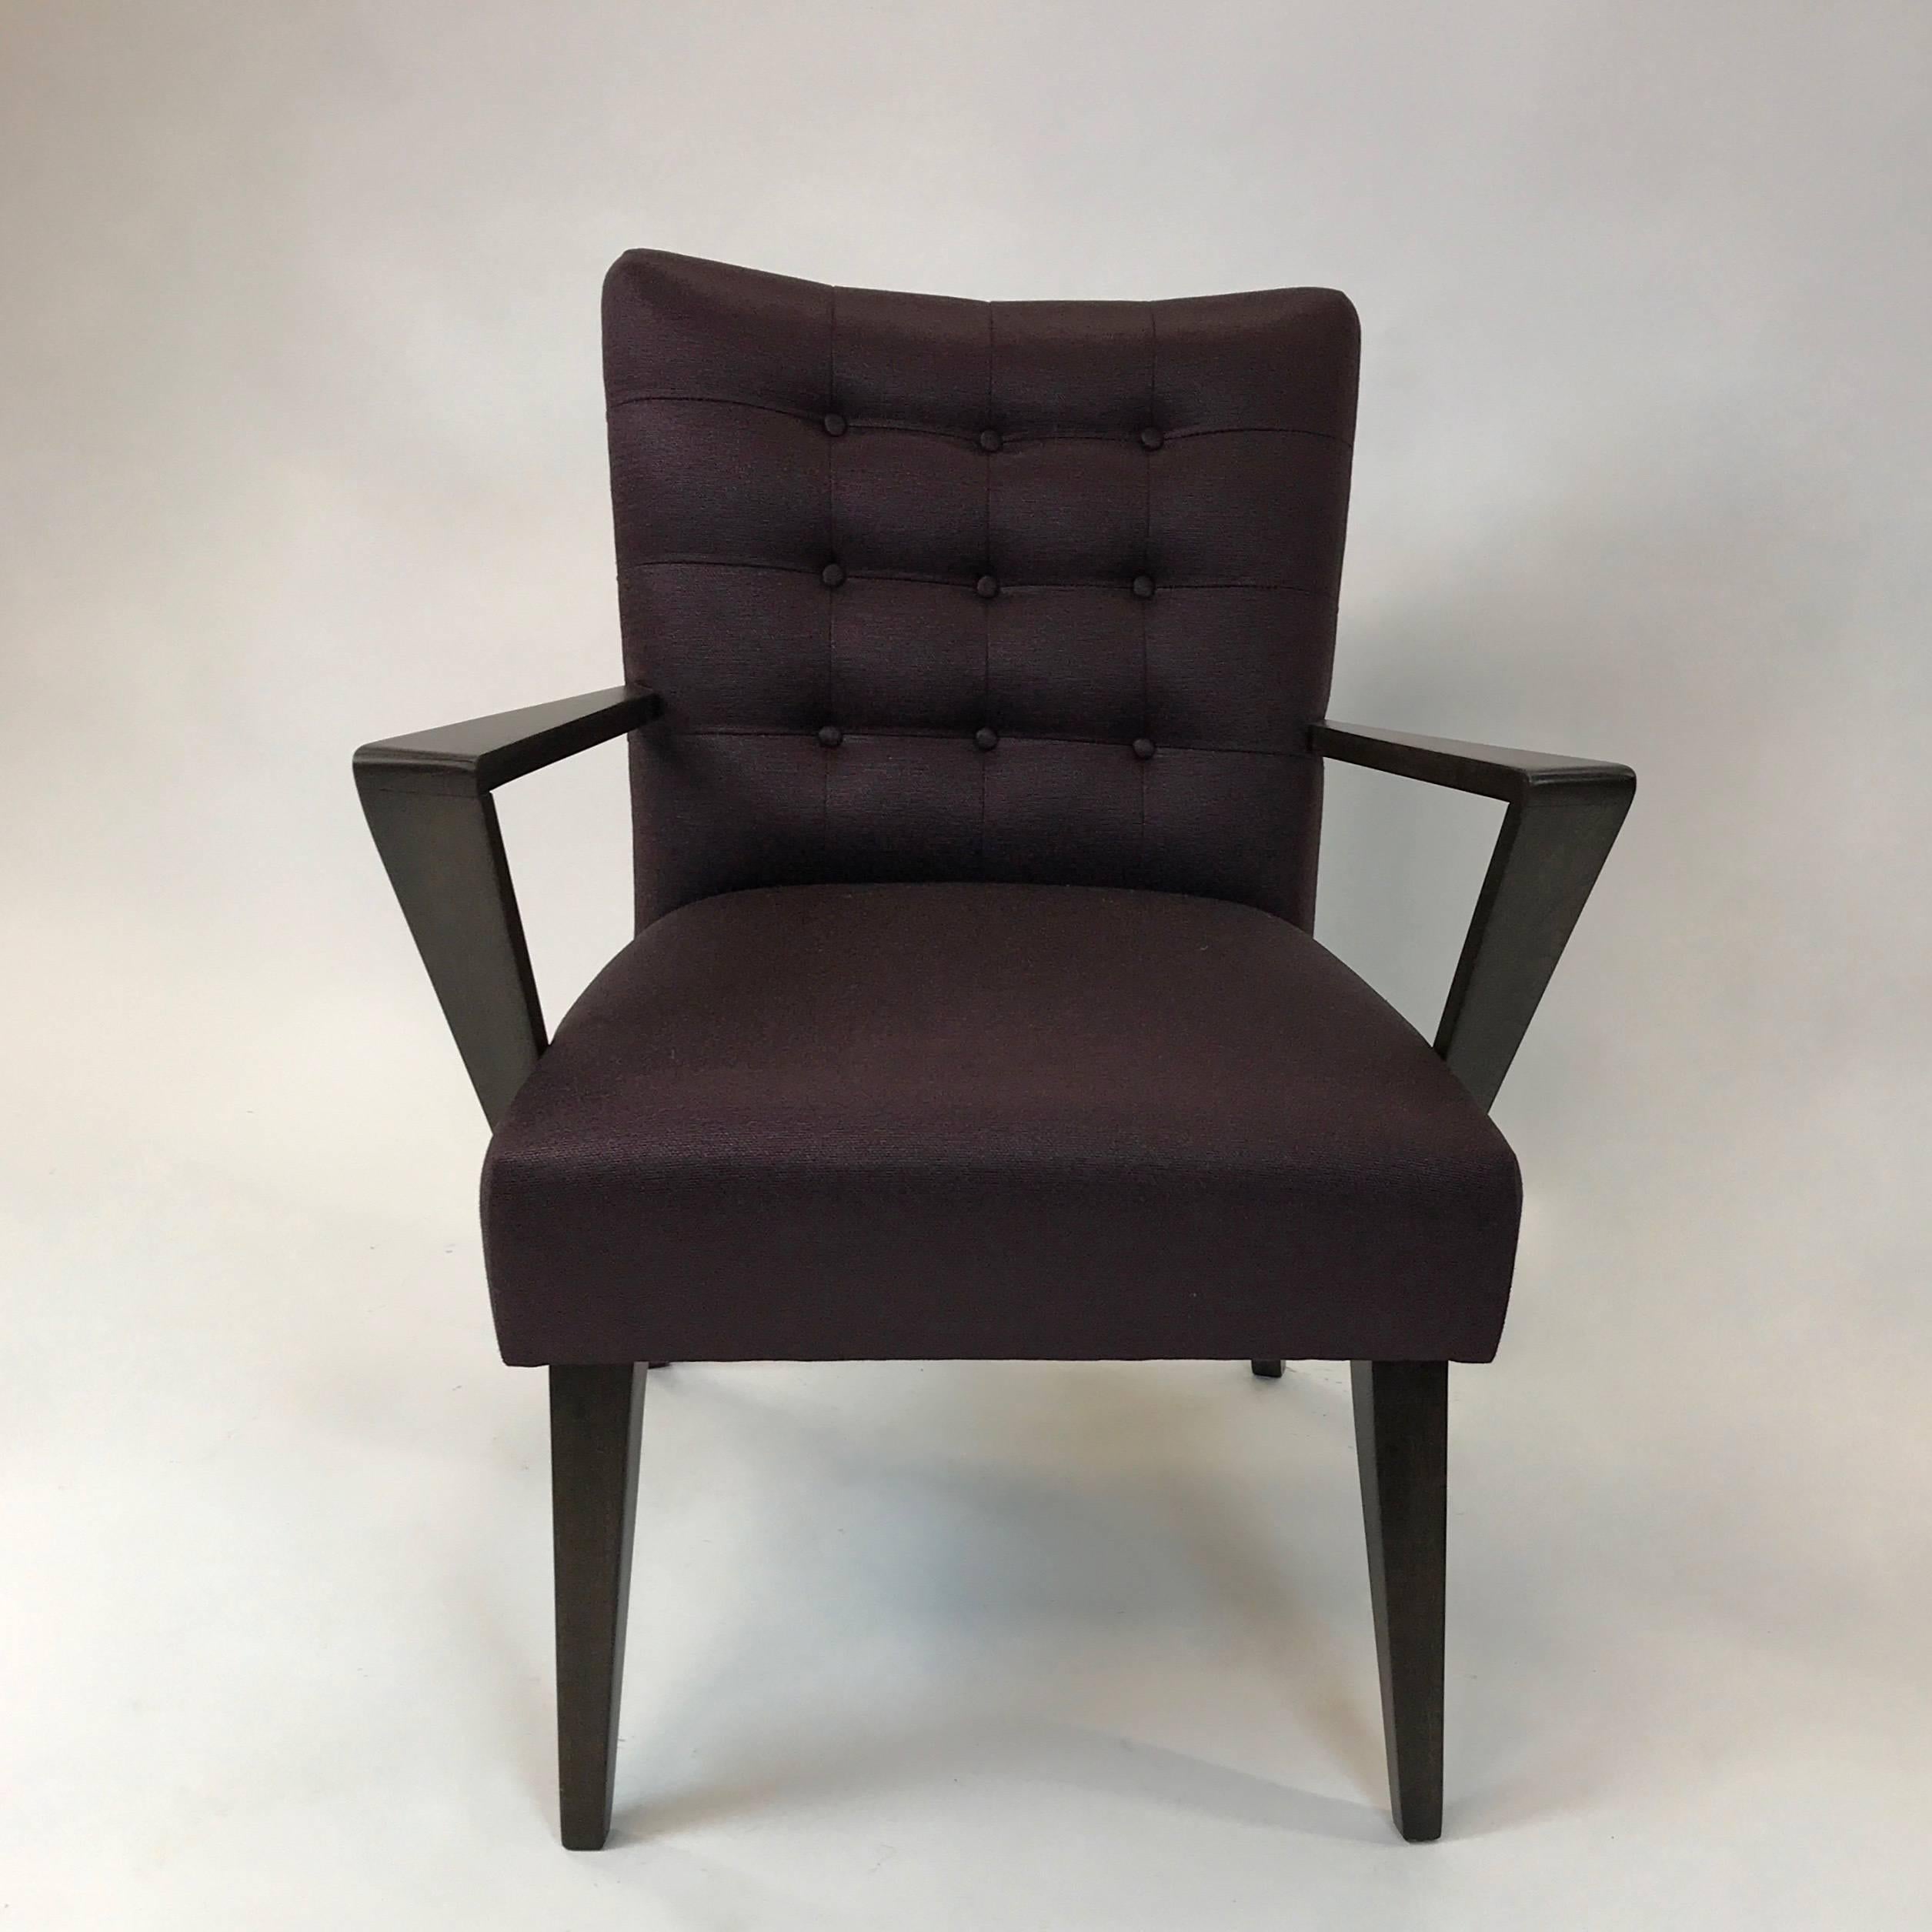 American Mid-Century Modern Upholstered Armchair For Sale